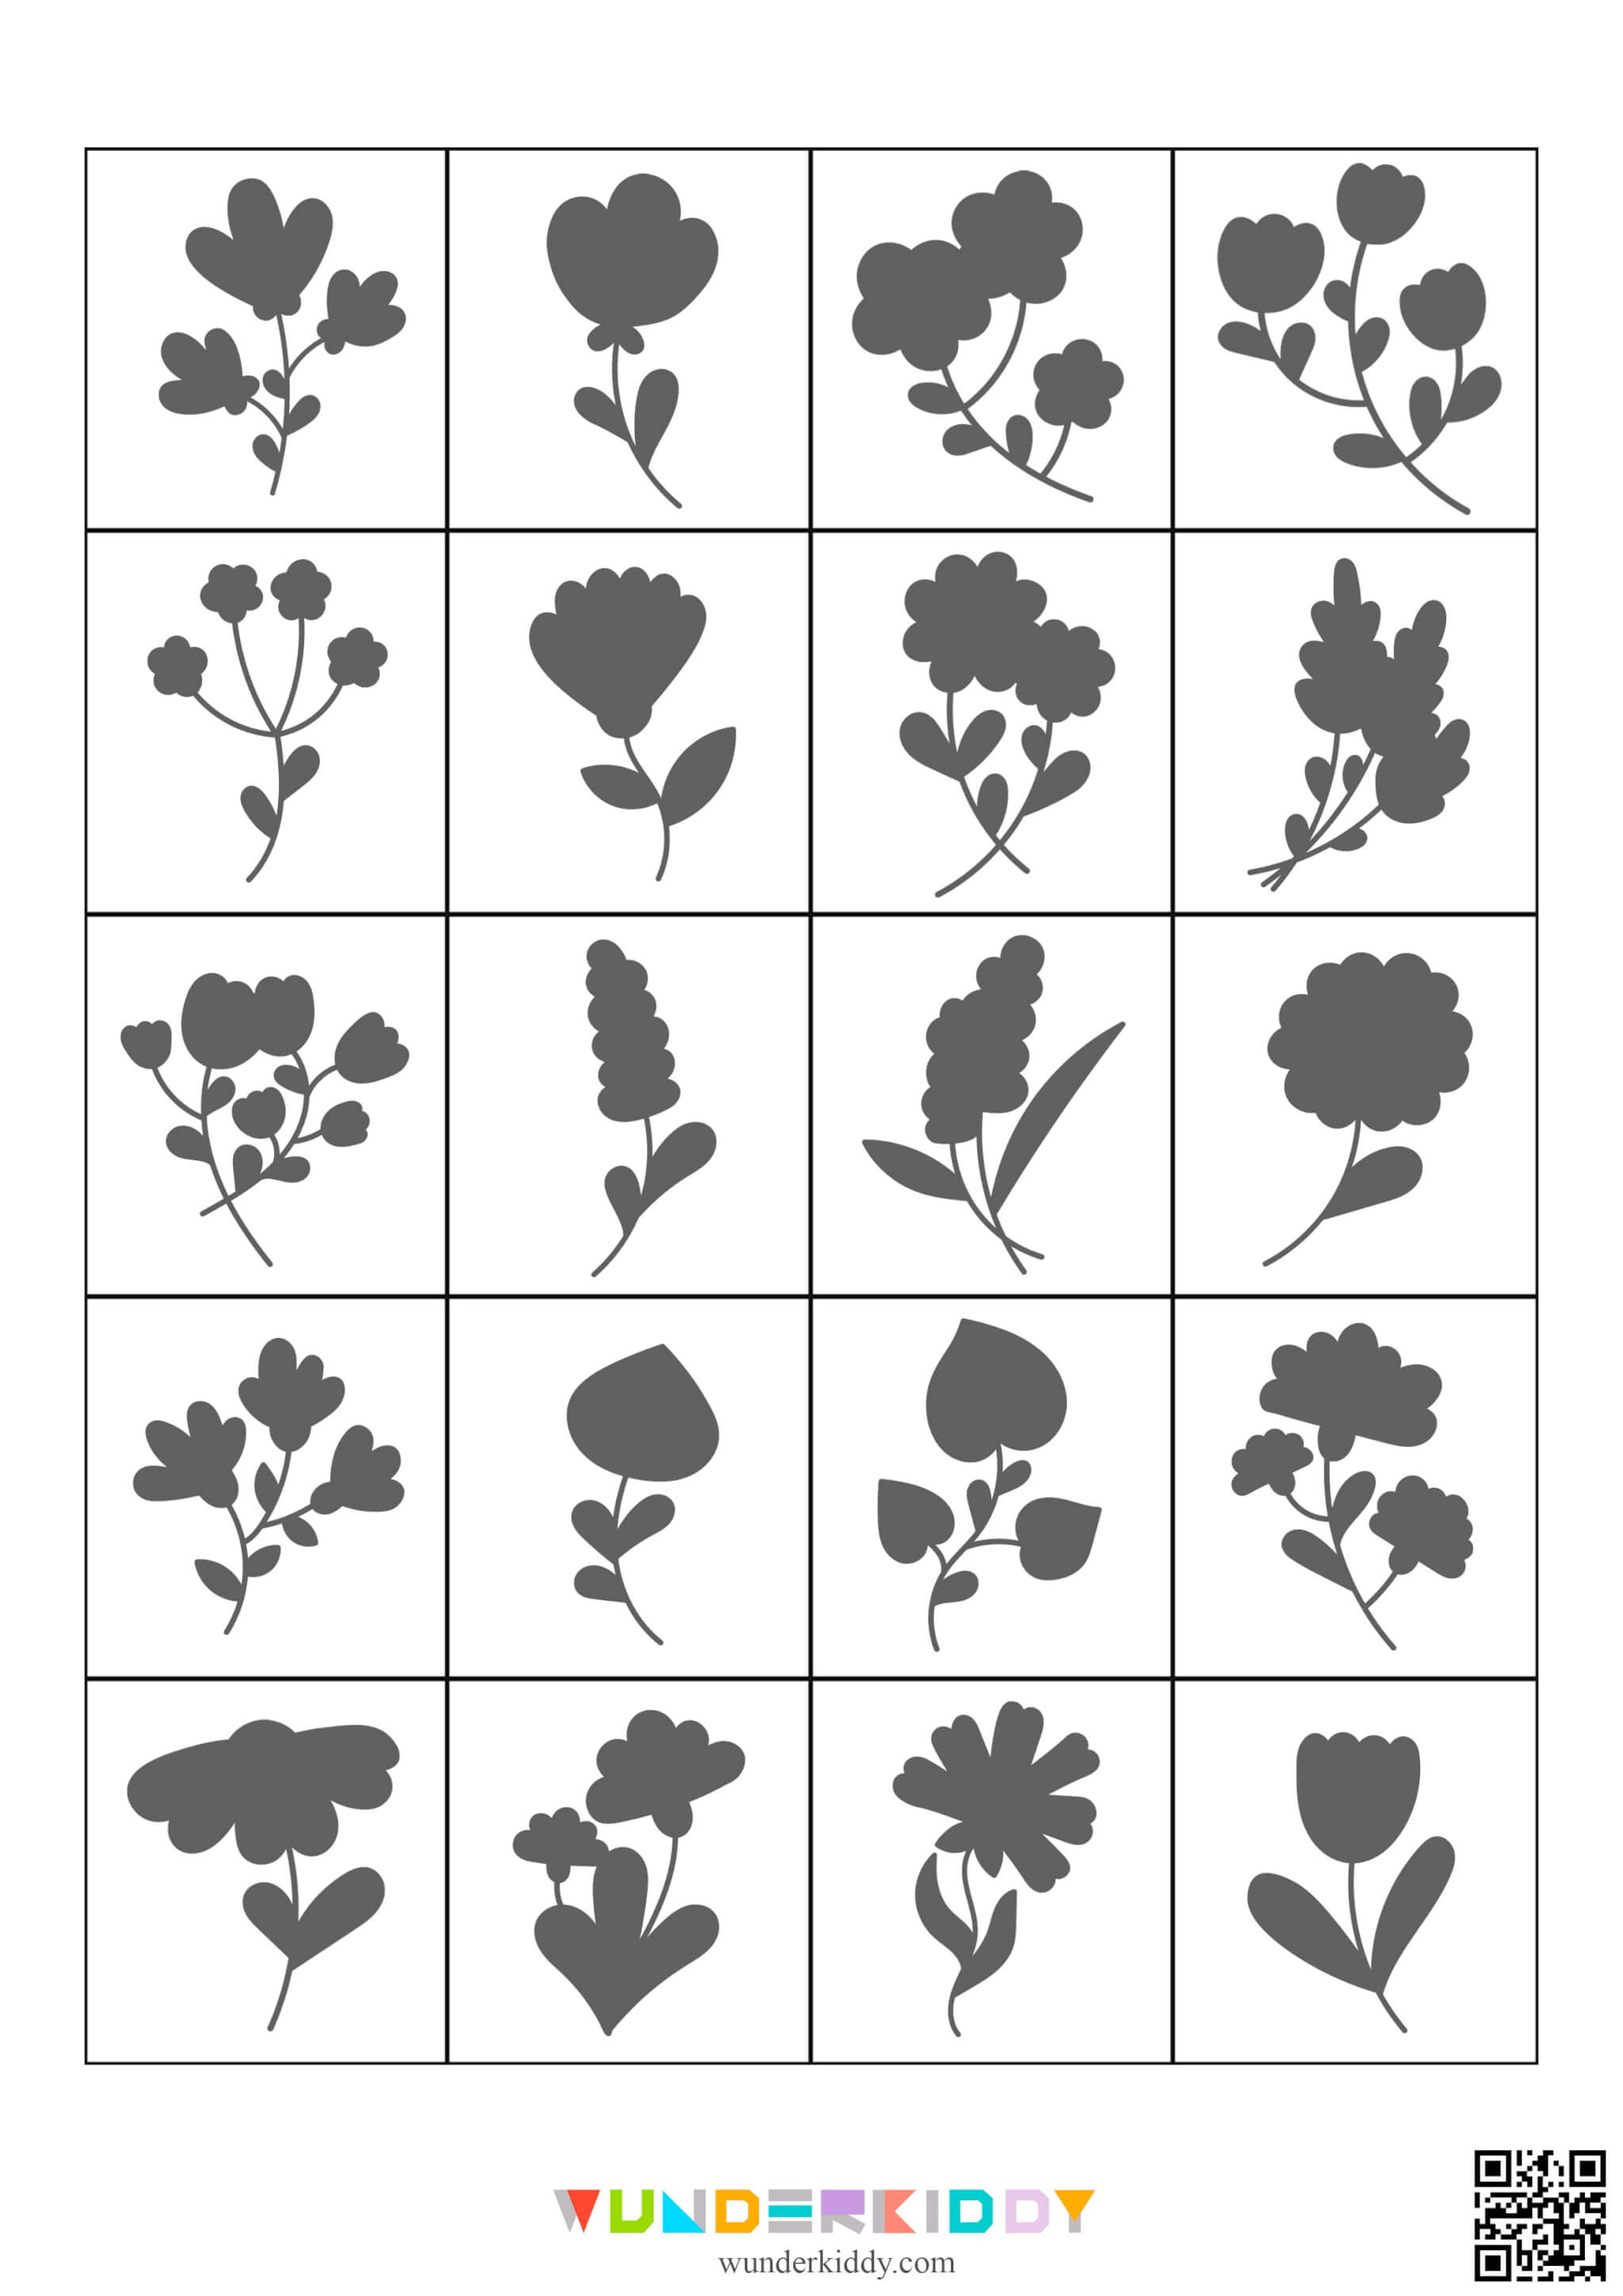 Flowers Shadow Matching Game - Image 2